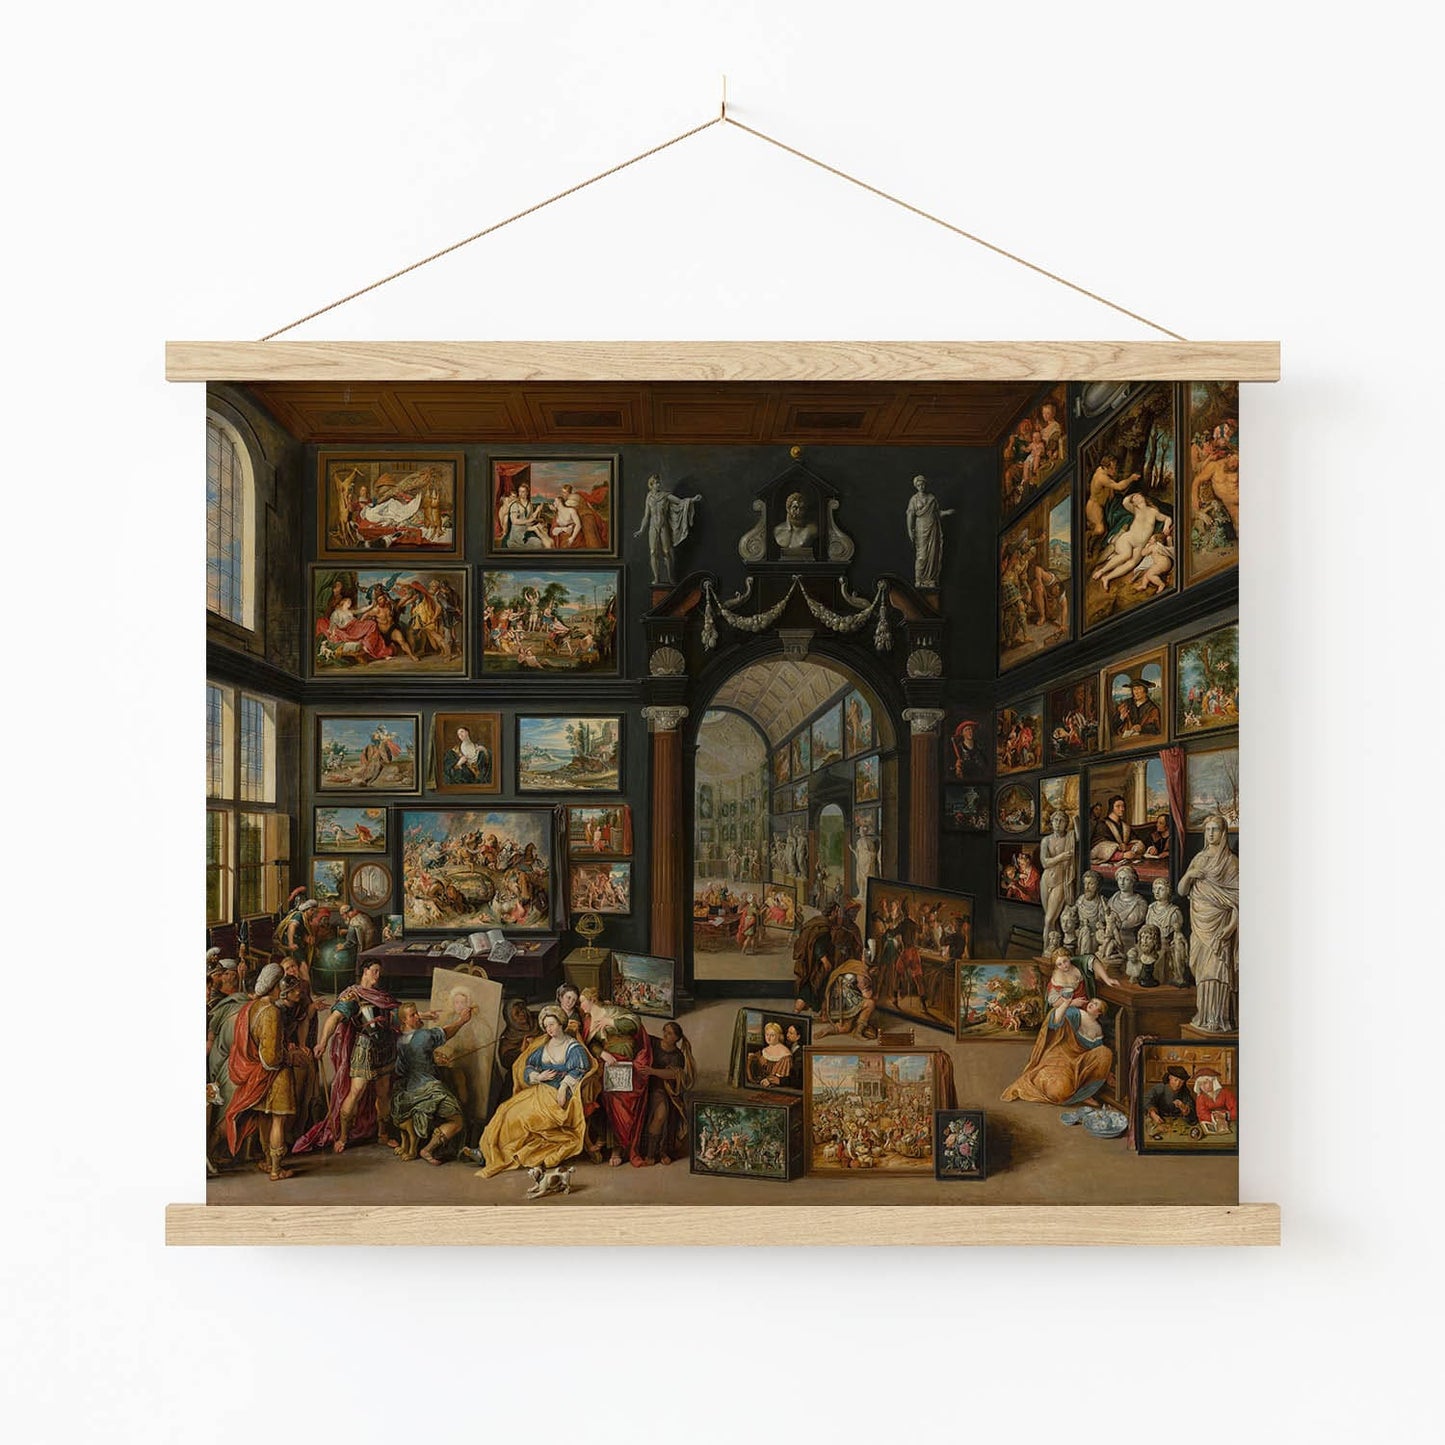 Academia and Art Art Print in Wood Hanger Frame on Wall